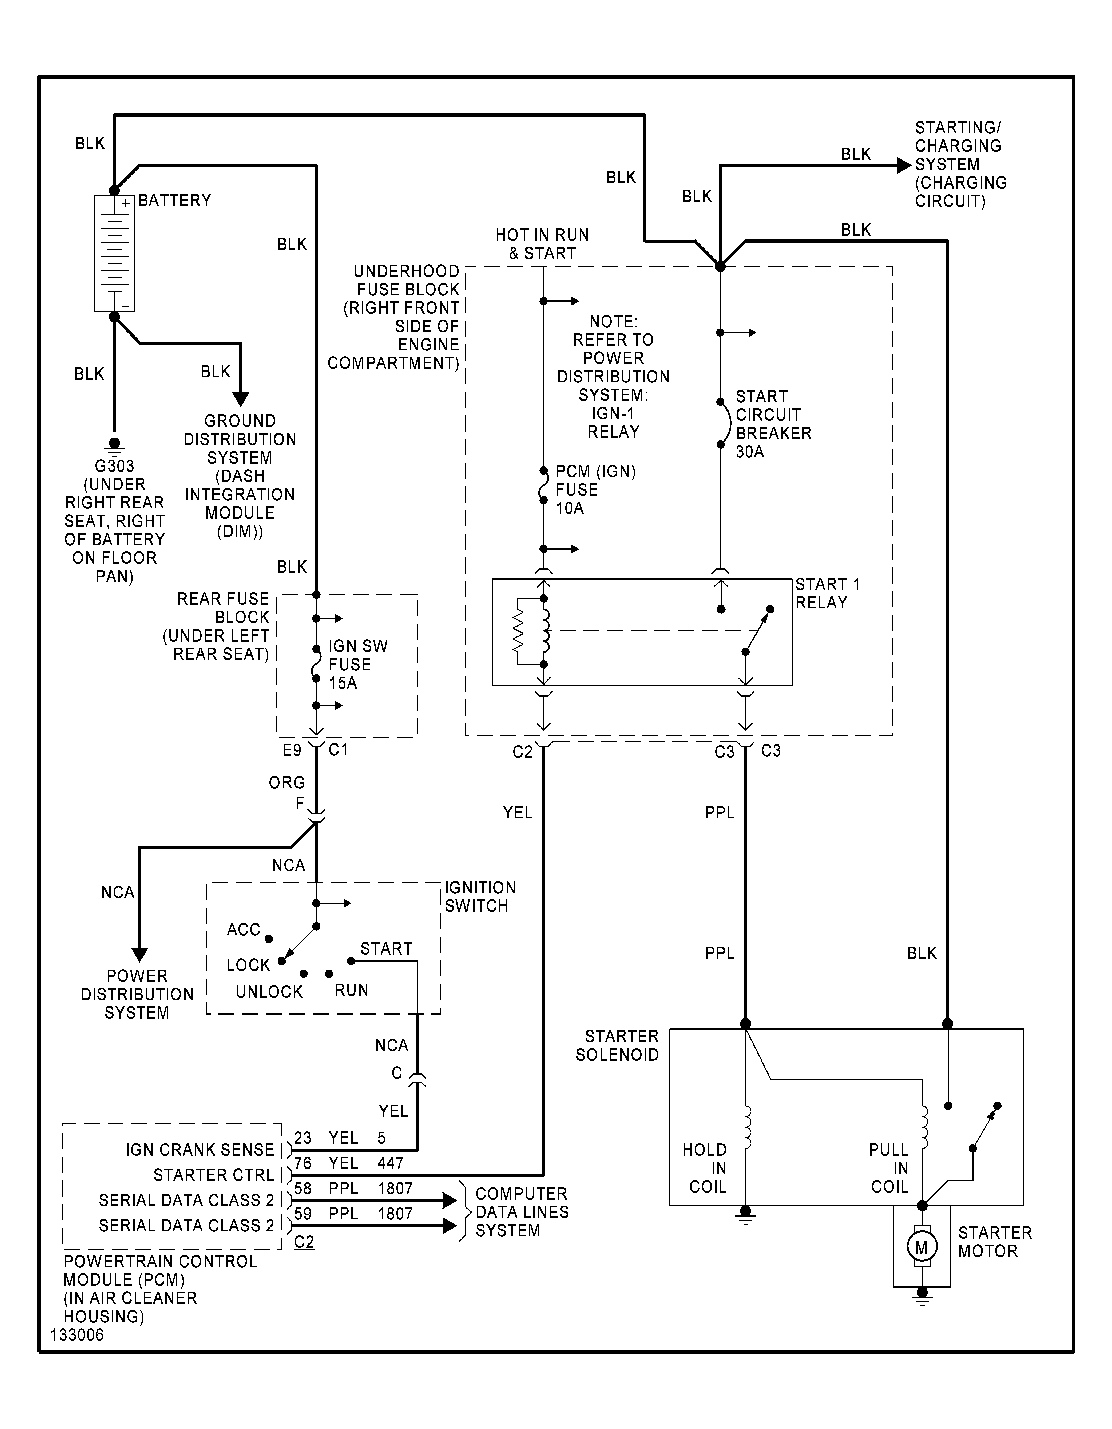 2001 Buick Lesabre Ignition Wiring Diagram from lh6.googleusercontent.com